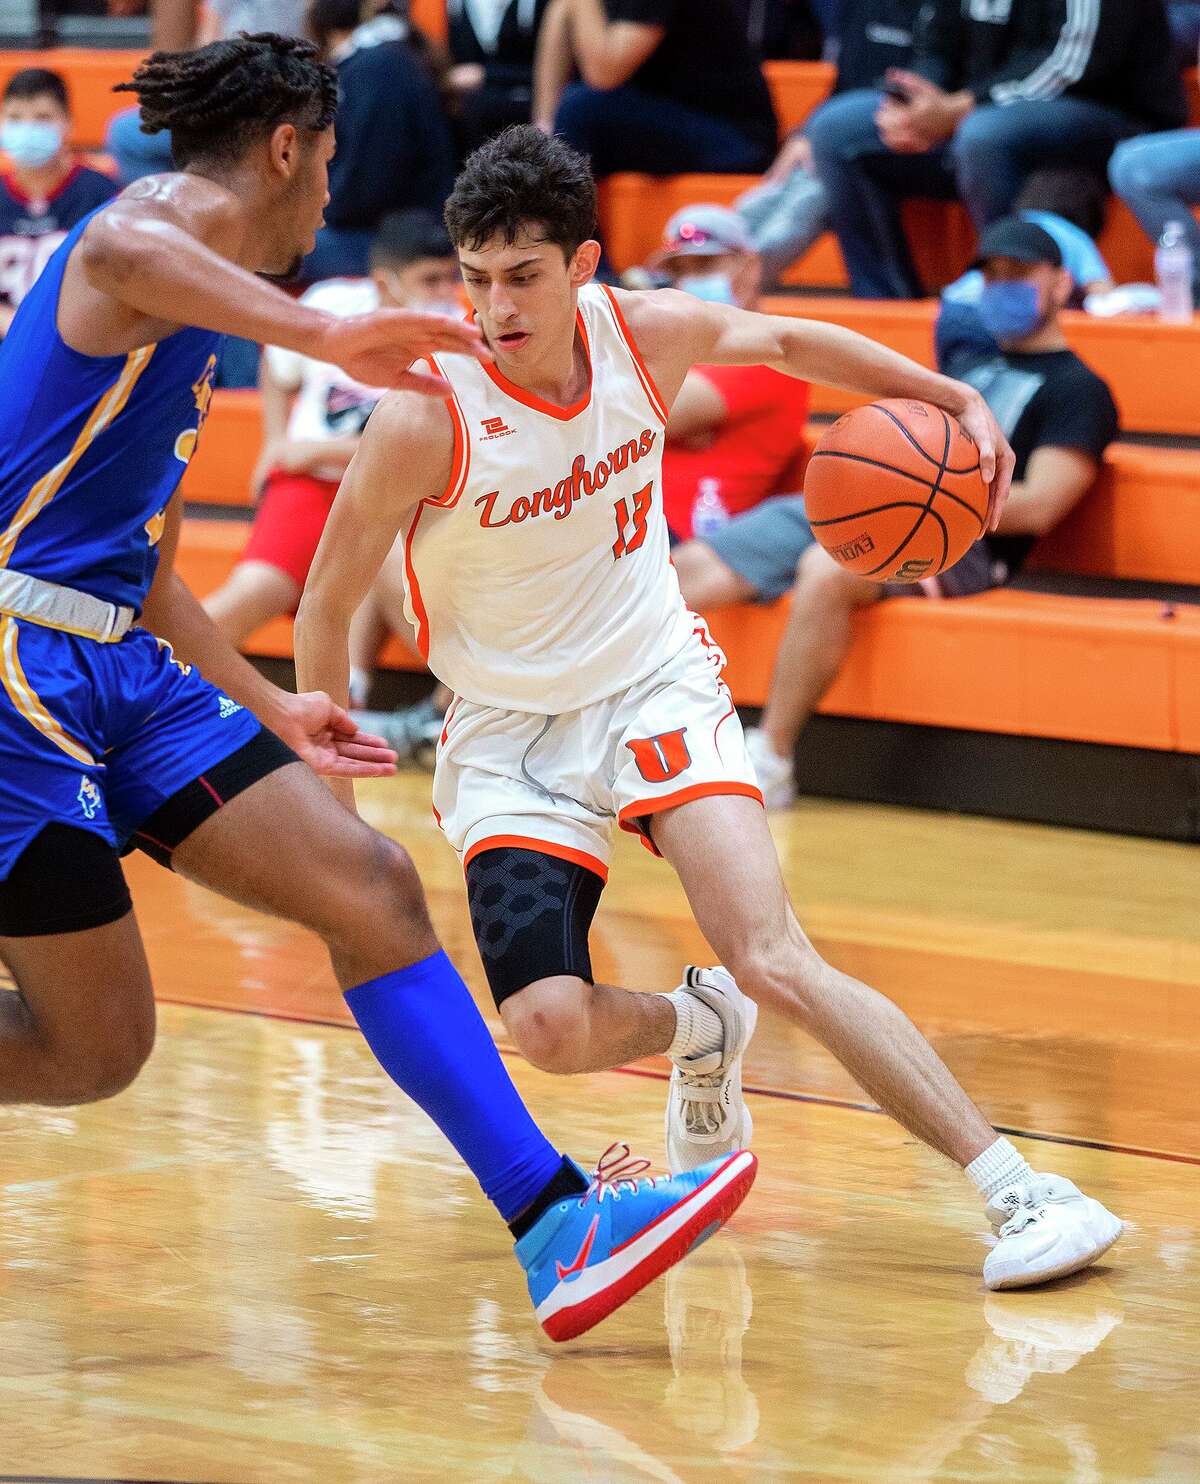 Eluid Fernandez and the United Longhorns fell to Clemens on Saturday.